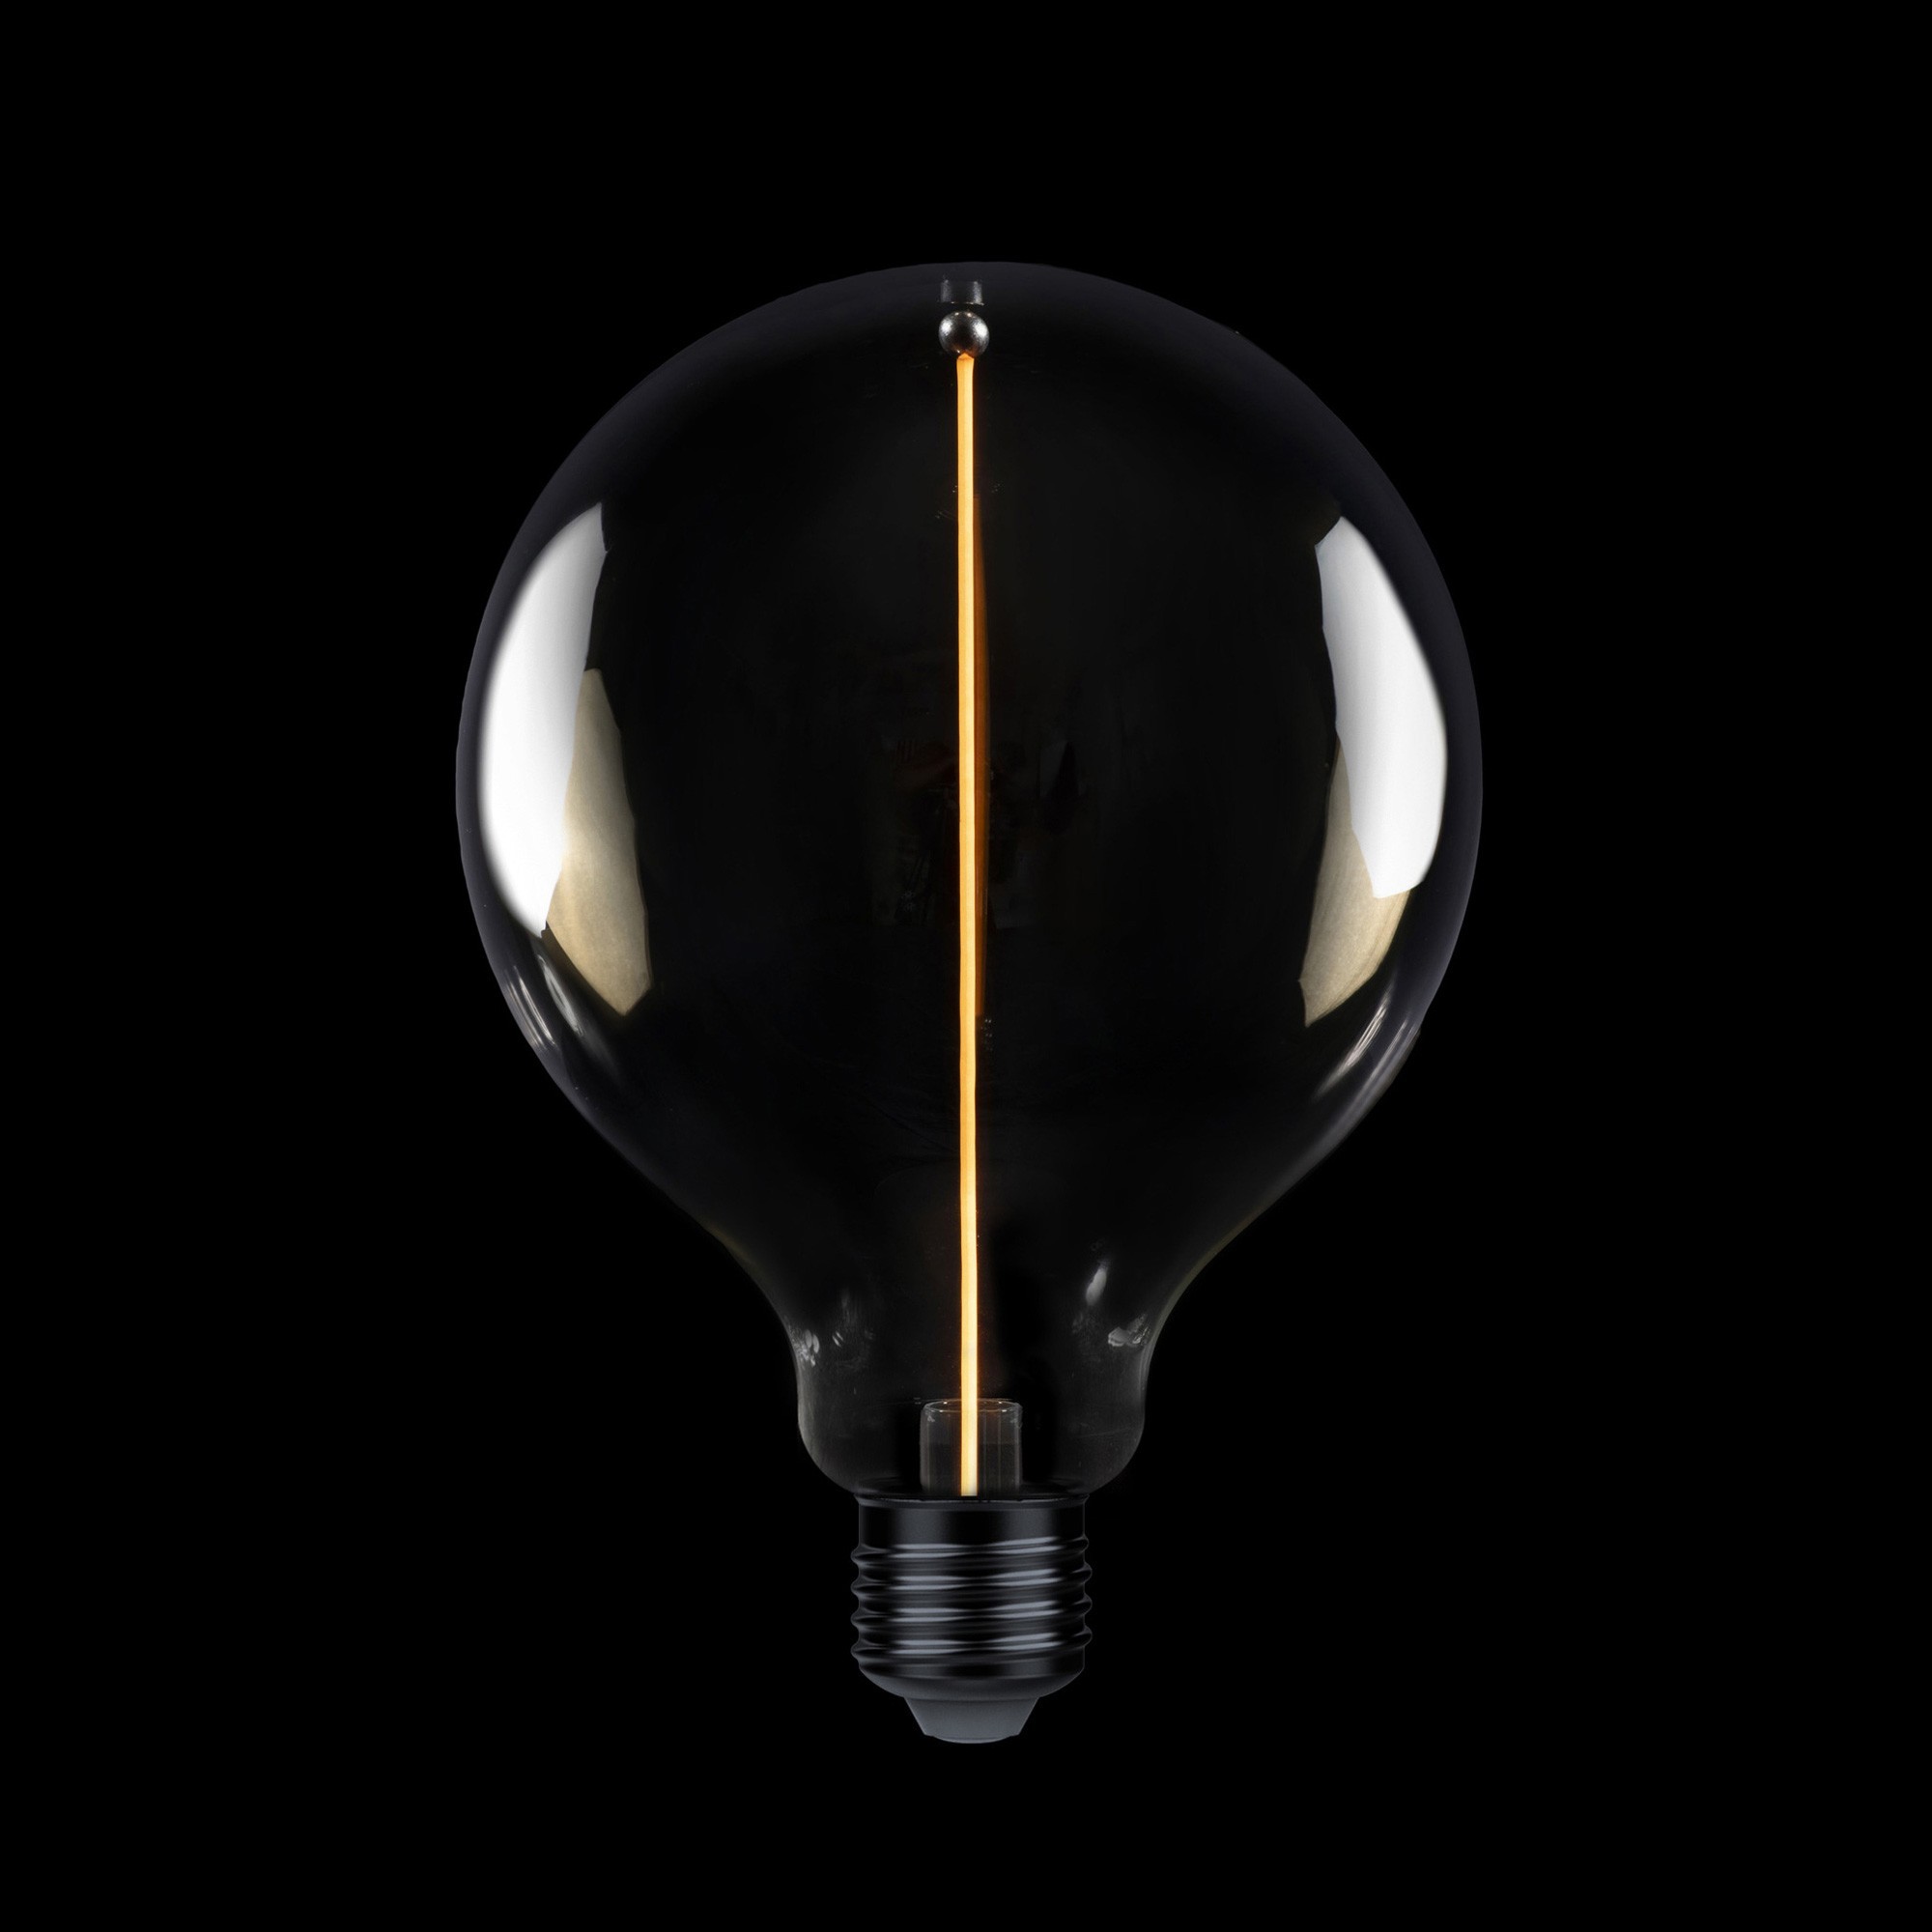 F05 - LED G125 Light Bulb, E27, 2,8W, 1800K, 90Lm, with magnetic filament and smoky glass